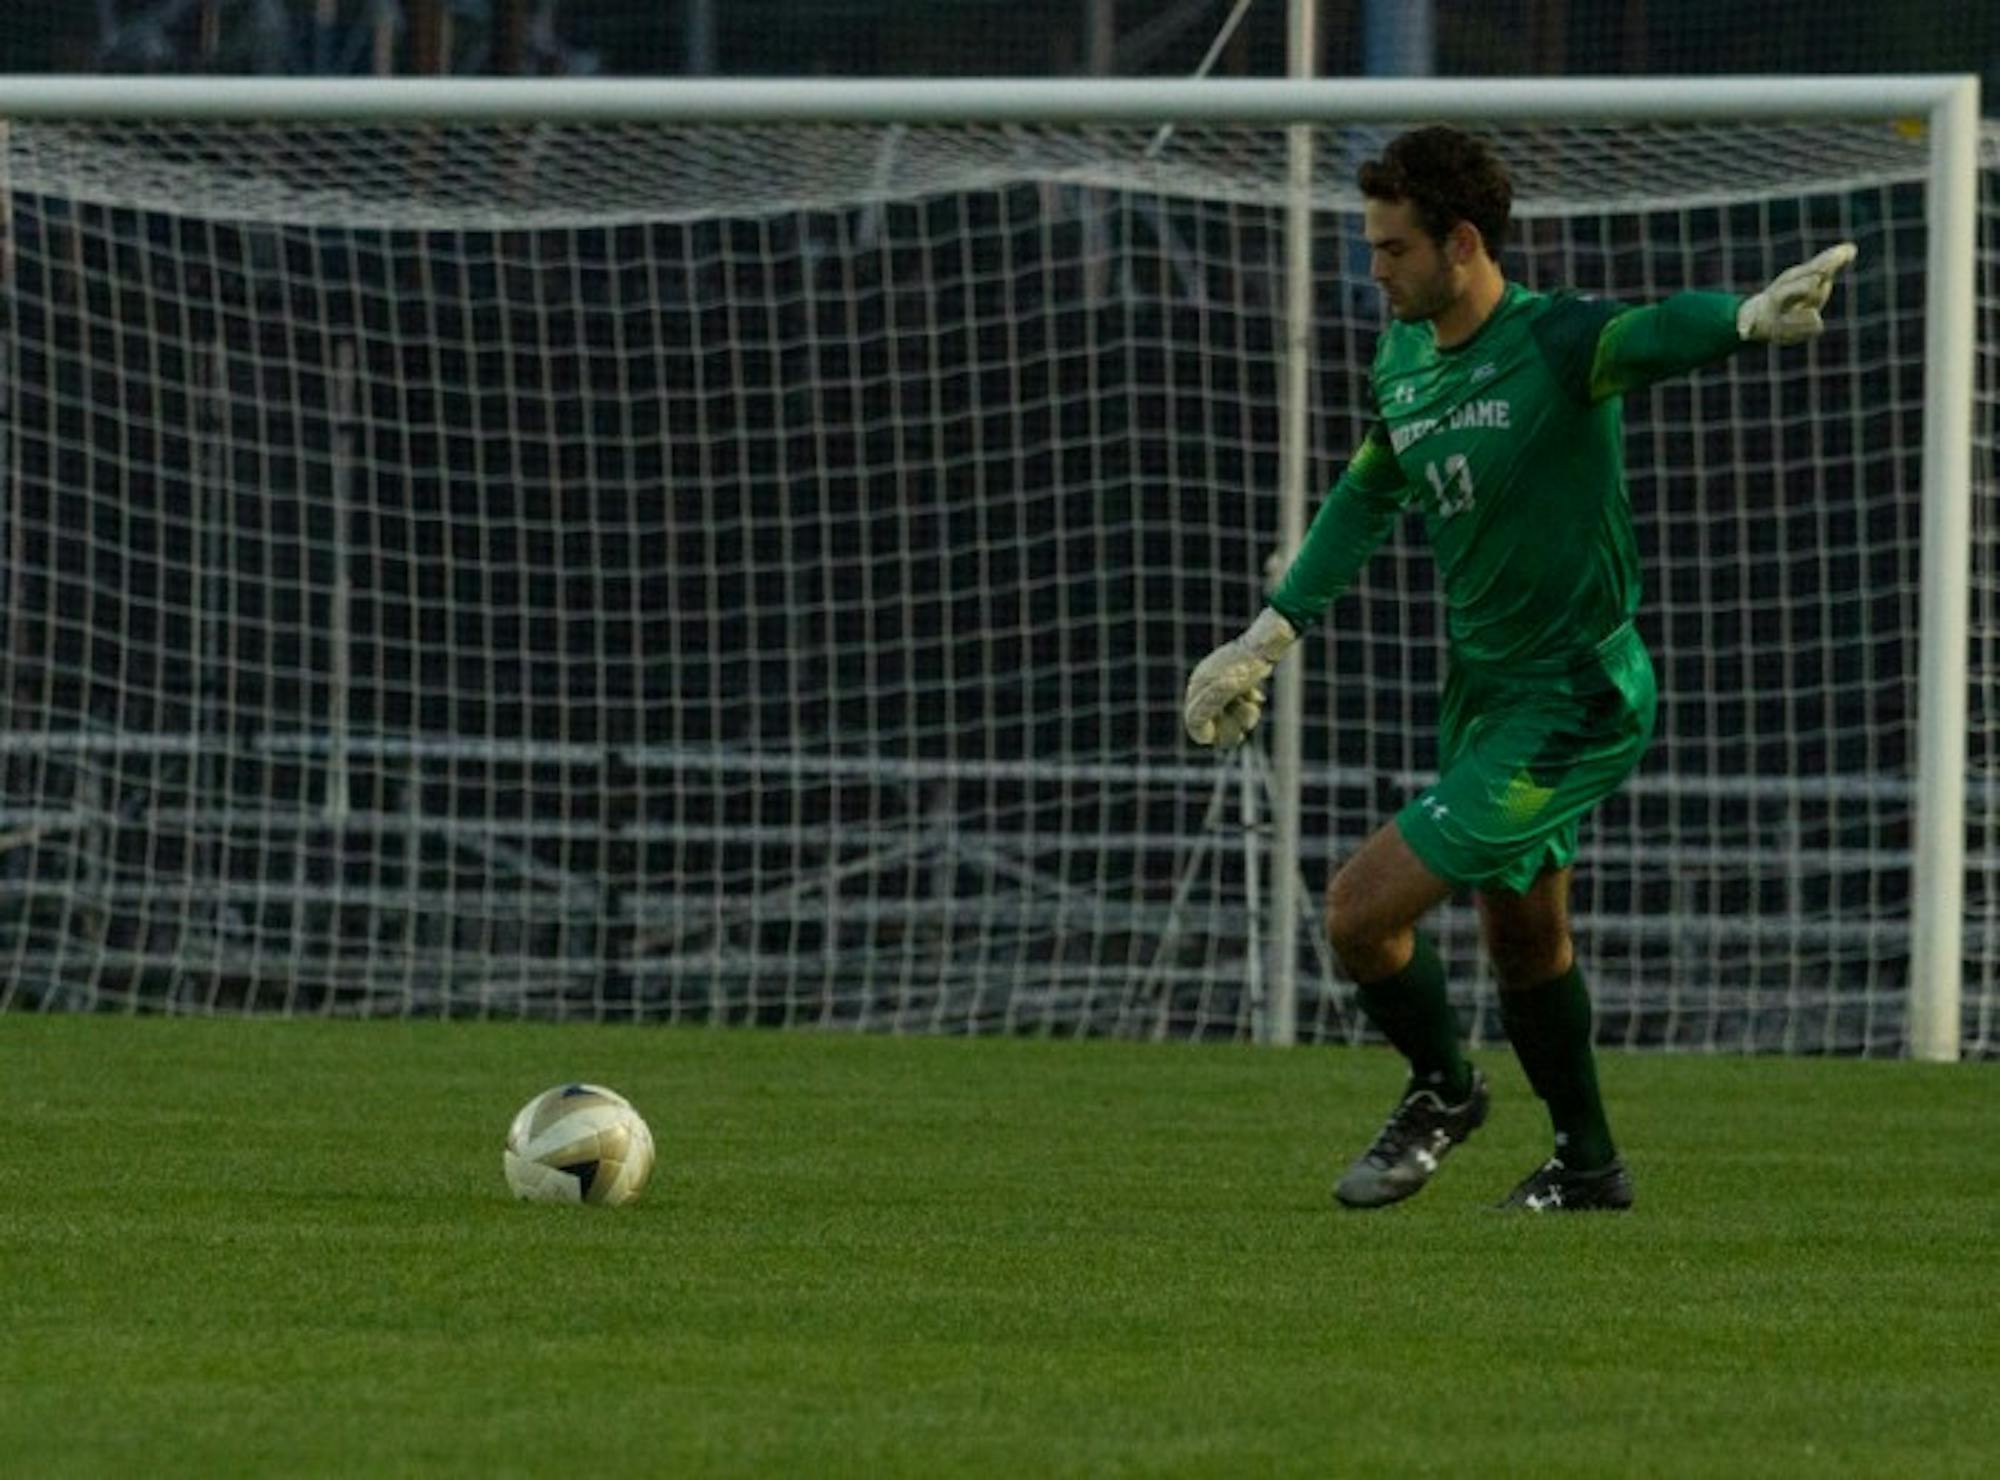 Junior goalkeeper Chris Hubbard kicks a goal kick during Notre Dame’s 3-1 victory over Virginia at Alumni Stadium on Sept. 25. The Irish travel to Virginia Tech for a game against the Hokies on Friday.